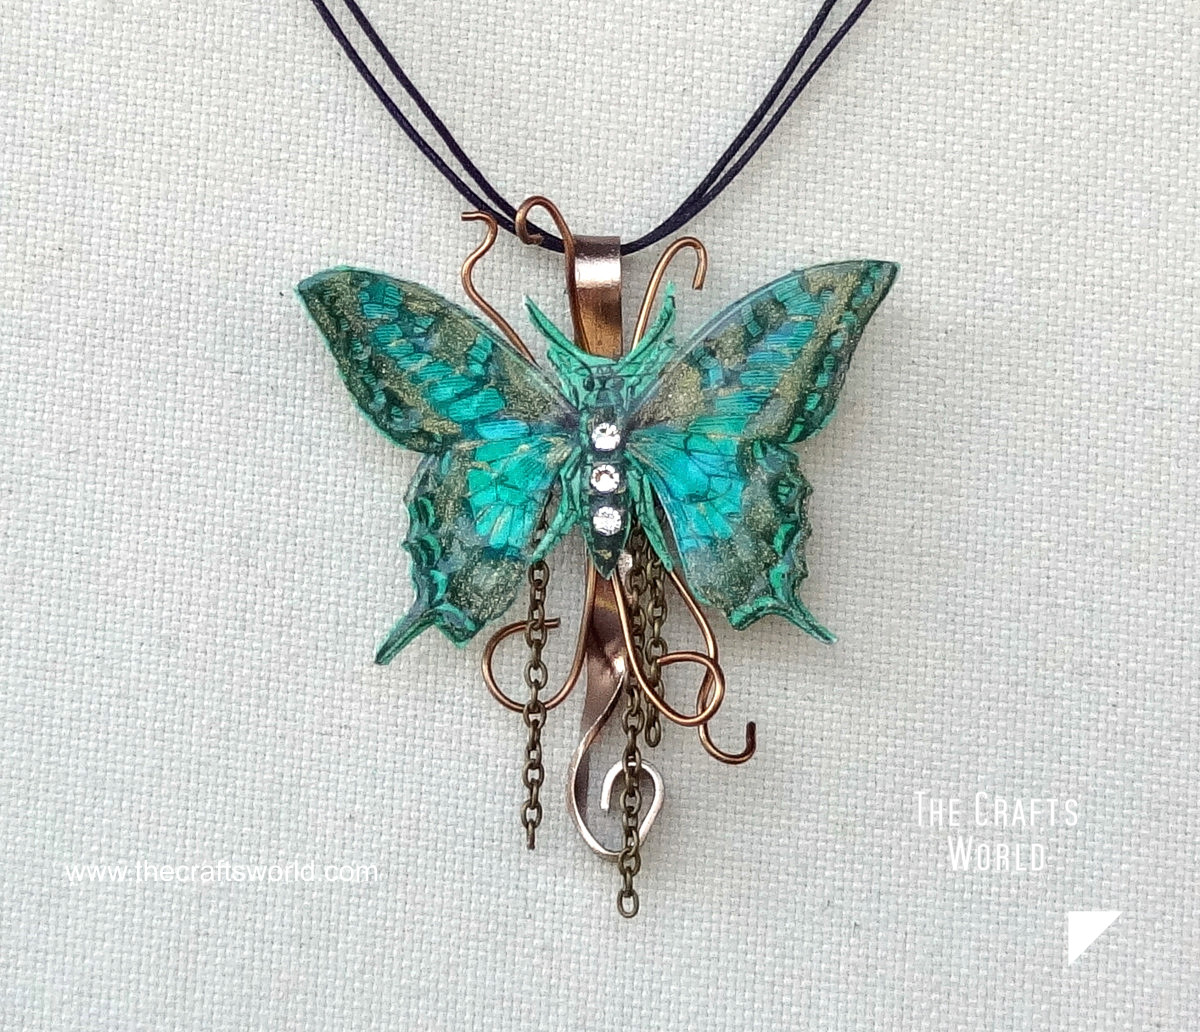 Butterfly pendant - close